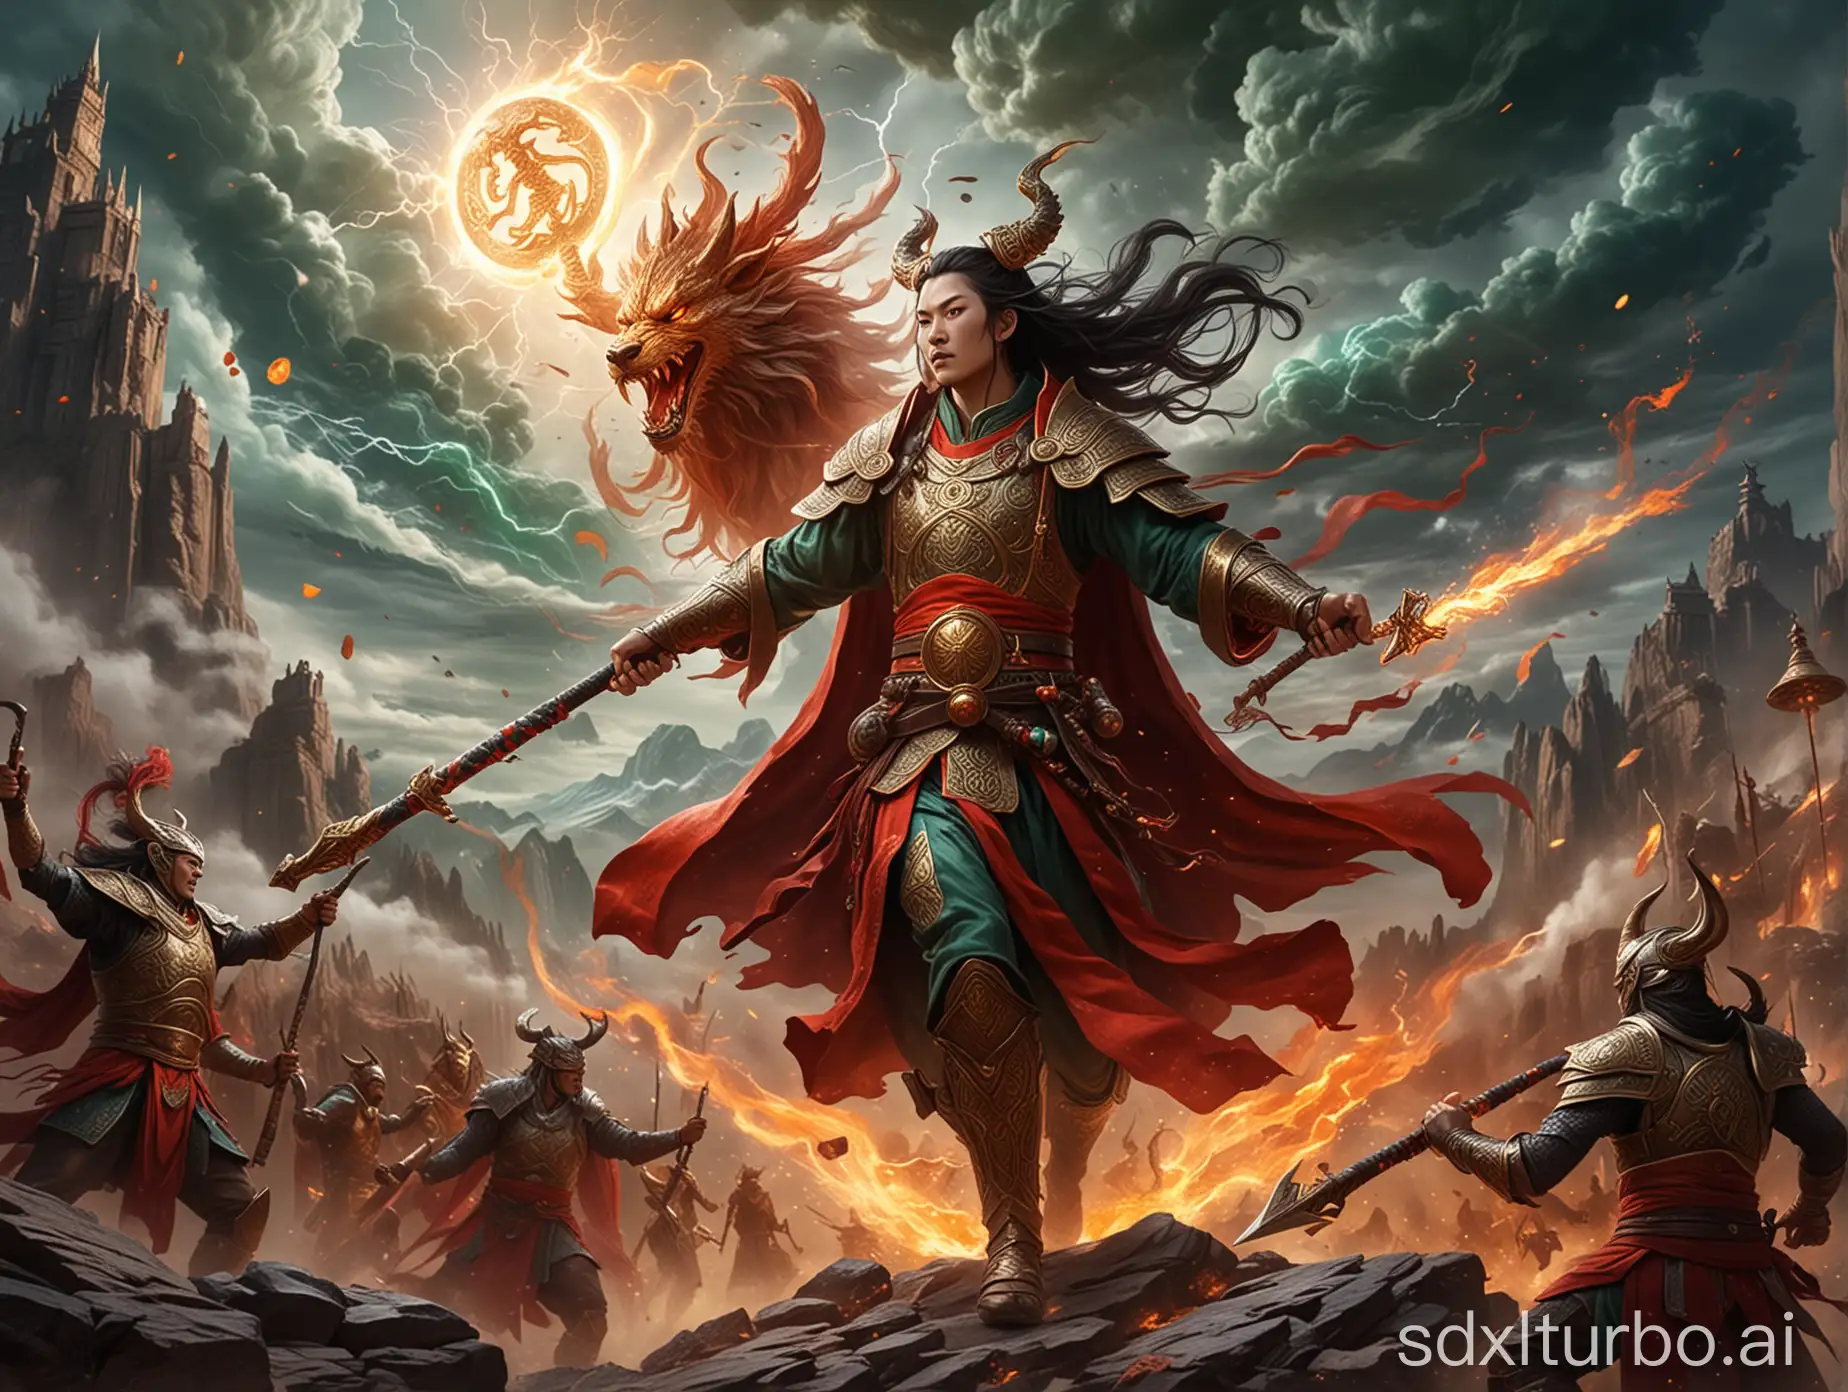 The background is a mysterious battlefield, with the sky interwoven with the colorful clouds of the Celestial Realm and the thunderstorms of Asgard.
2. The deities of the Chinese Celestial Realm, such as the Jade Emperor, Nezha, and the Thunder God, are dressed in magnificent golden and red battle robes, each wielding their iconic divine weapons, such as the Jade Emperor's jade ruyi, Nezha's fire-tipped spear, and wind-fire wheels.
3. The deities of Norse Asgard, such as Odin, Thor, and Loki, are clad in iron armor and wield legendary weapons, such as Thor's hammer, Mjolnir.
4. The deities on both sides unleash powerful spells and artifact powers in intense combat, including lightning, flames, ice storms, and chaotic energy.
5. In the center of the scene is a duel between two leaders, the Jade Emperor's jade ruyi clashes with Odin's Gungnir, surrounded by dazzling magical light and shockwaves.
6. The ground is engraved with ancient runic slabs, surrounded by mythical creatures such as qilins and the giant wolf Fenrir watching the battle, adding a mythological hue to the combat.
7. The lighting effects are dramatic, using strong contrasts and dynamic blurring to highlight the urgency of the battle and the fluidity of the action.
8. Overall, a realistic style is adopted, with vivid colors and rich details, to create a stunning visual experience.